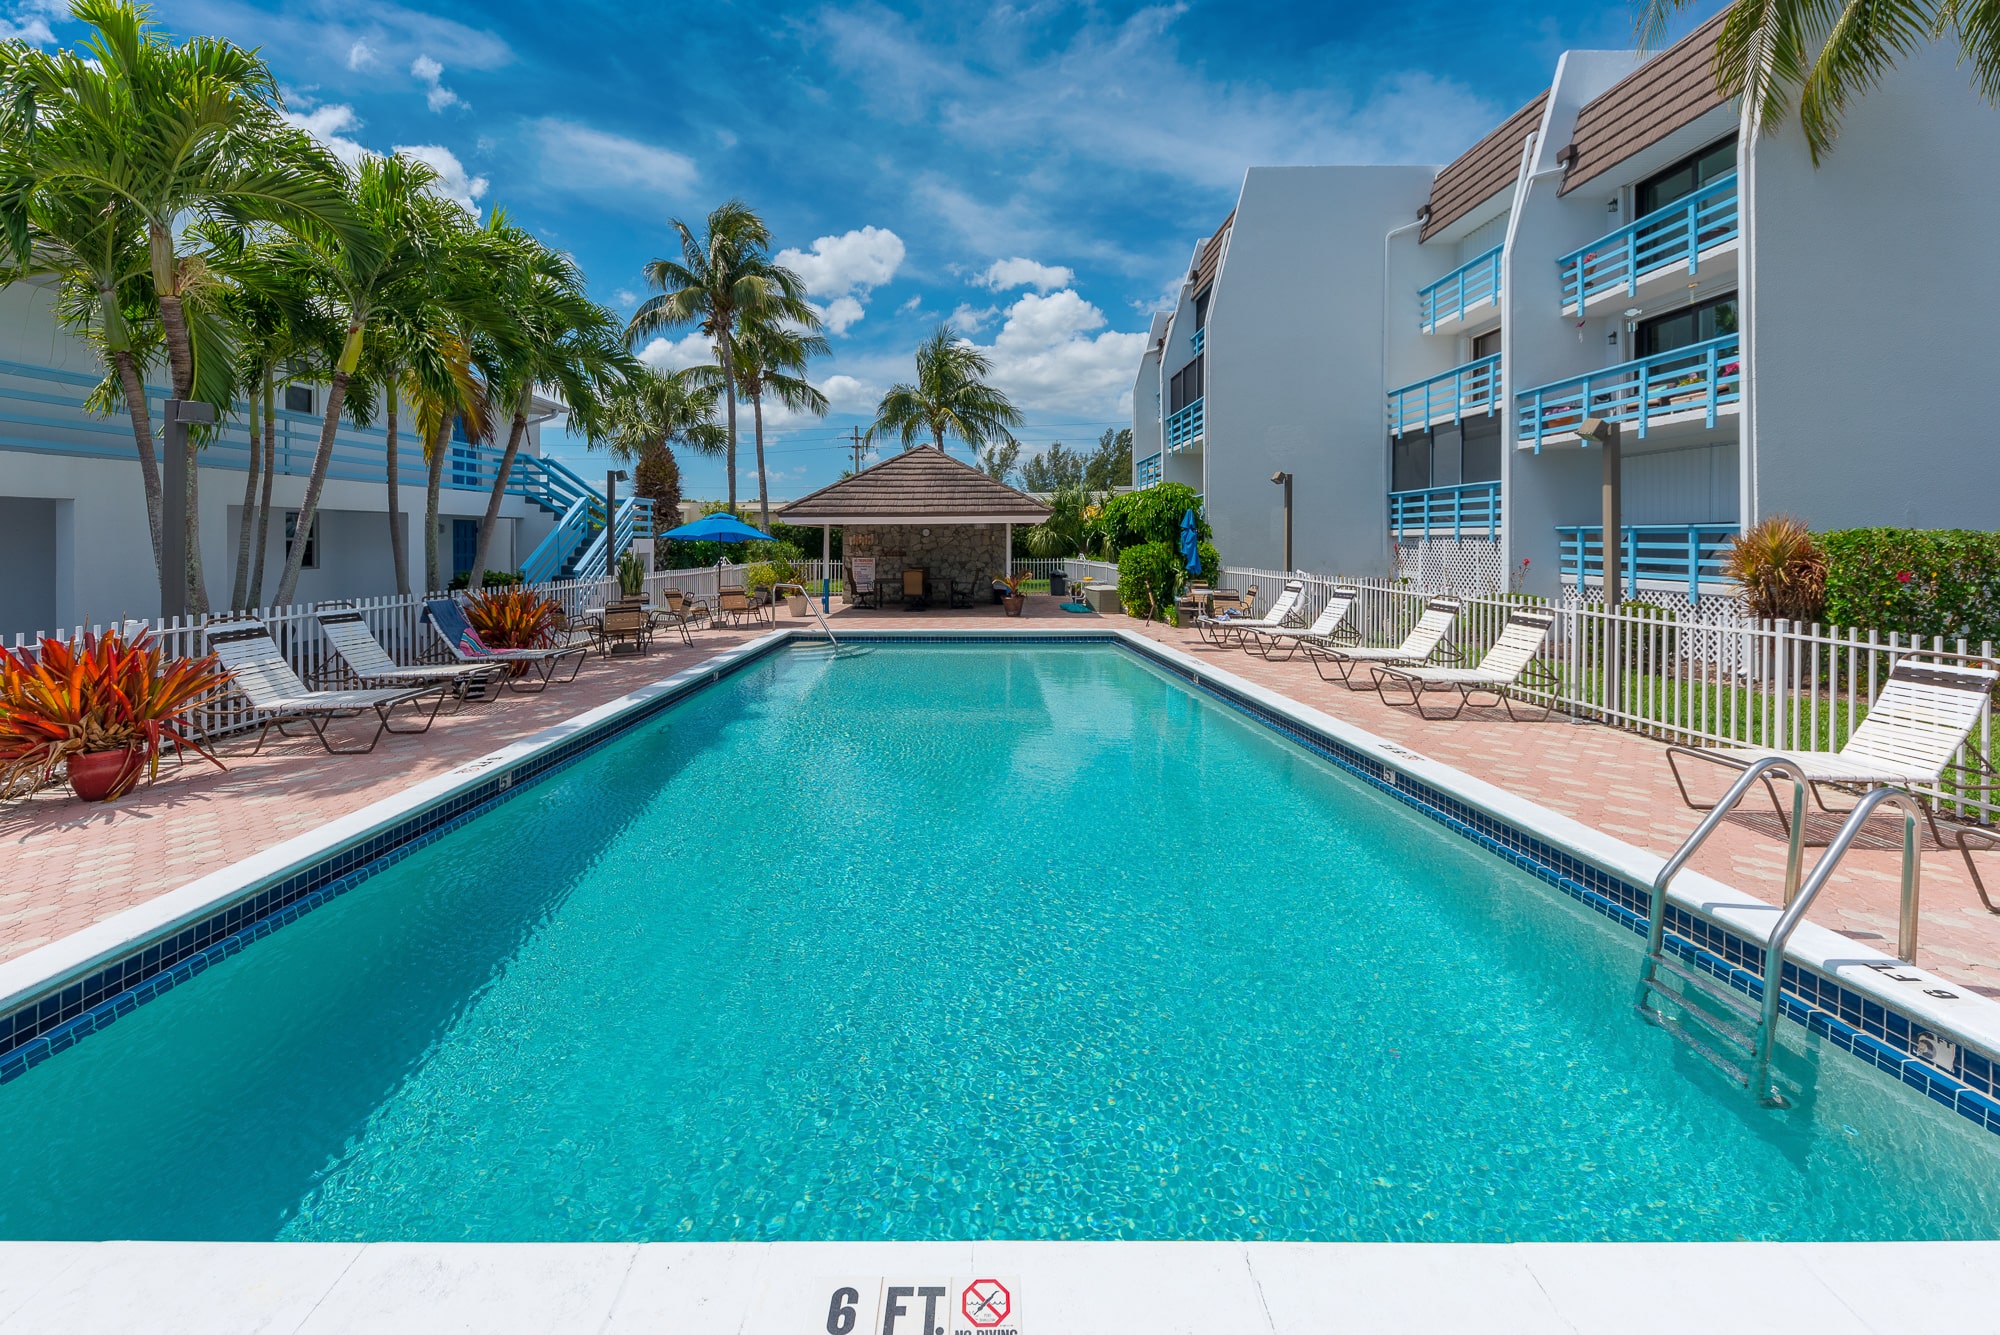 https://www.paradiserealtyfla.com/posts/5-reasons-why-this-condo-listing-makes-the-perfect-vacation-spot-island-living-or-investment-property